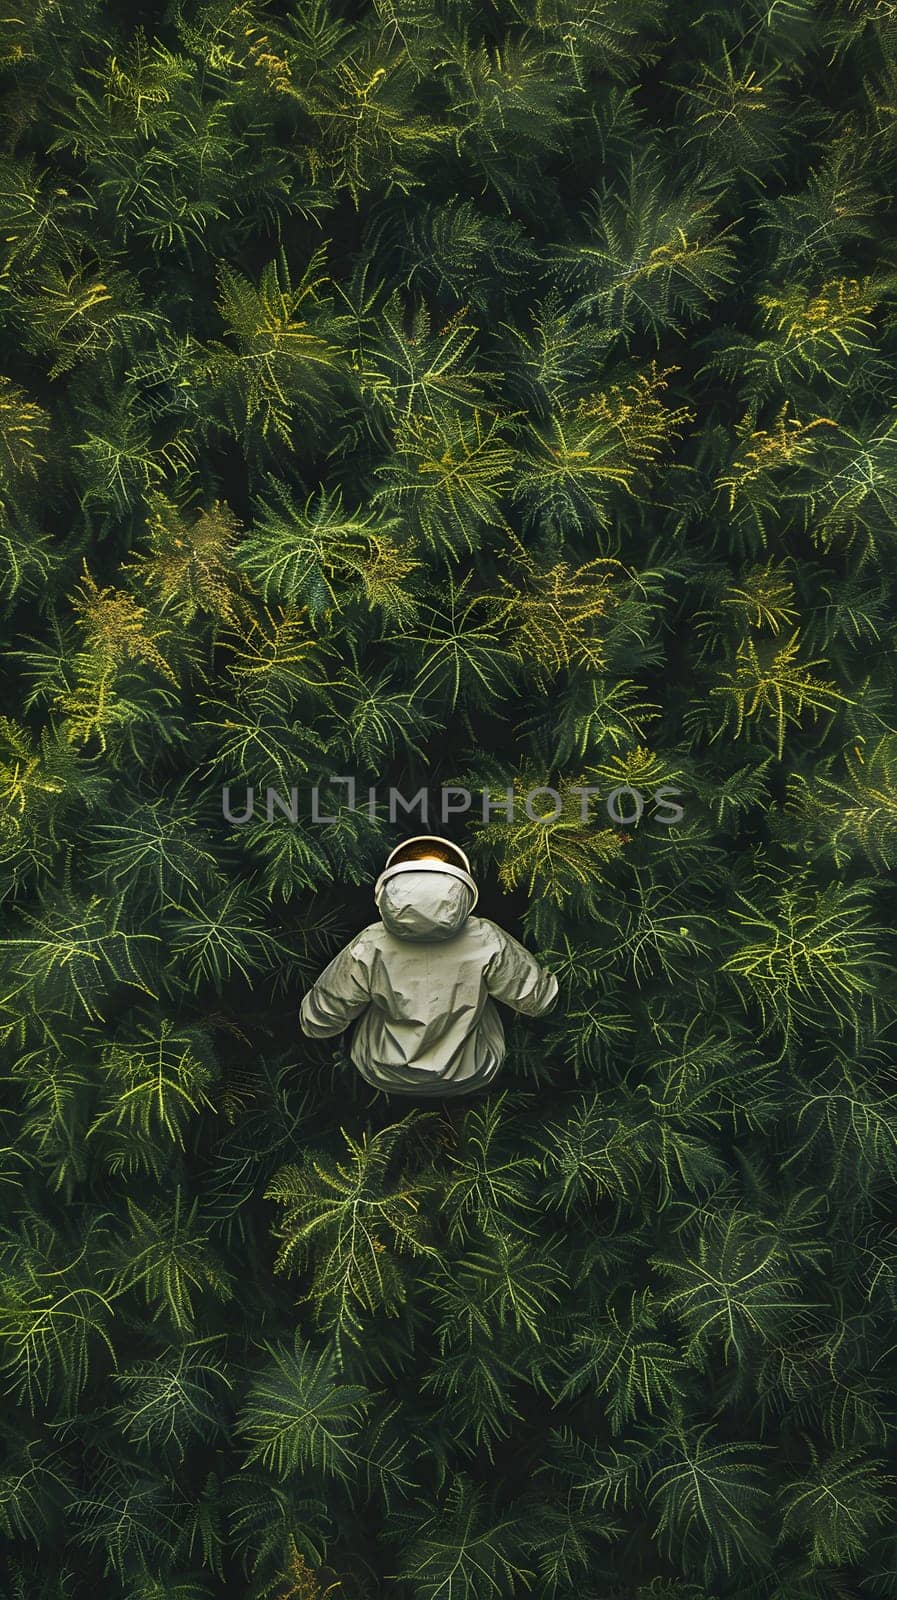 A figure in a mask sits among evergreens in a forest by Nadtochiy